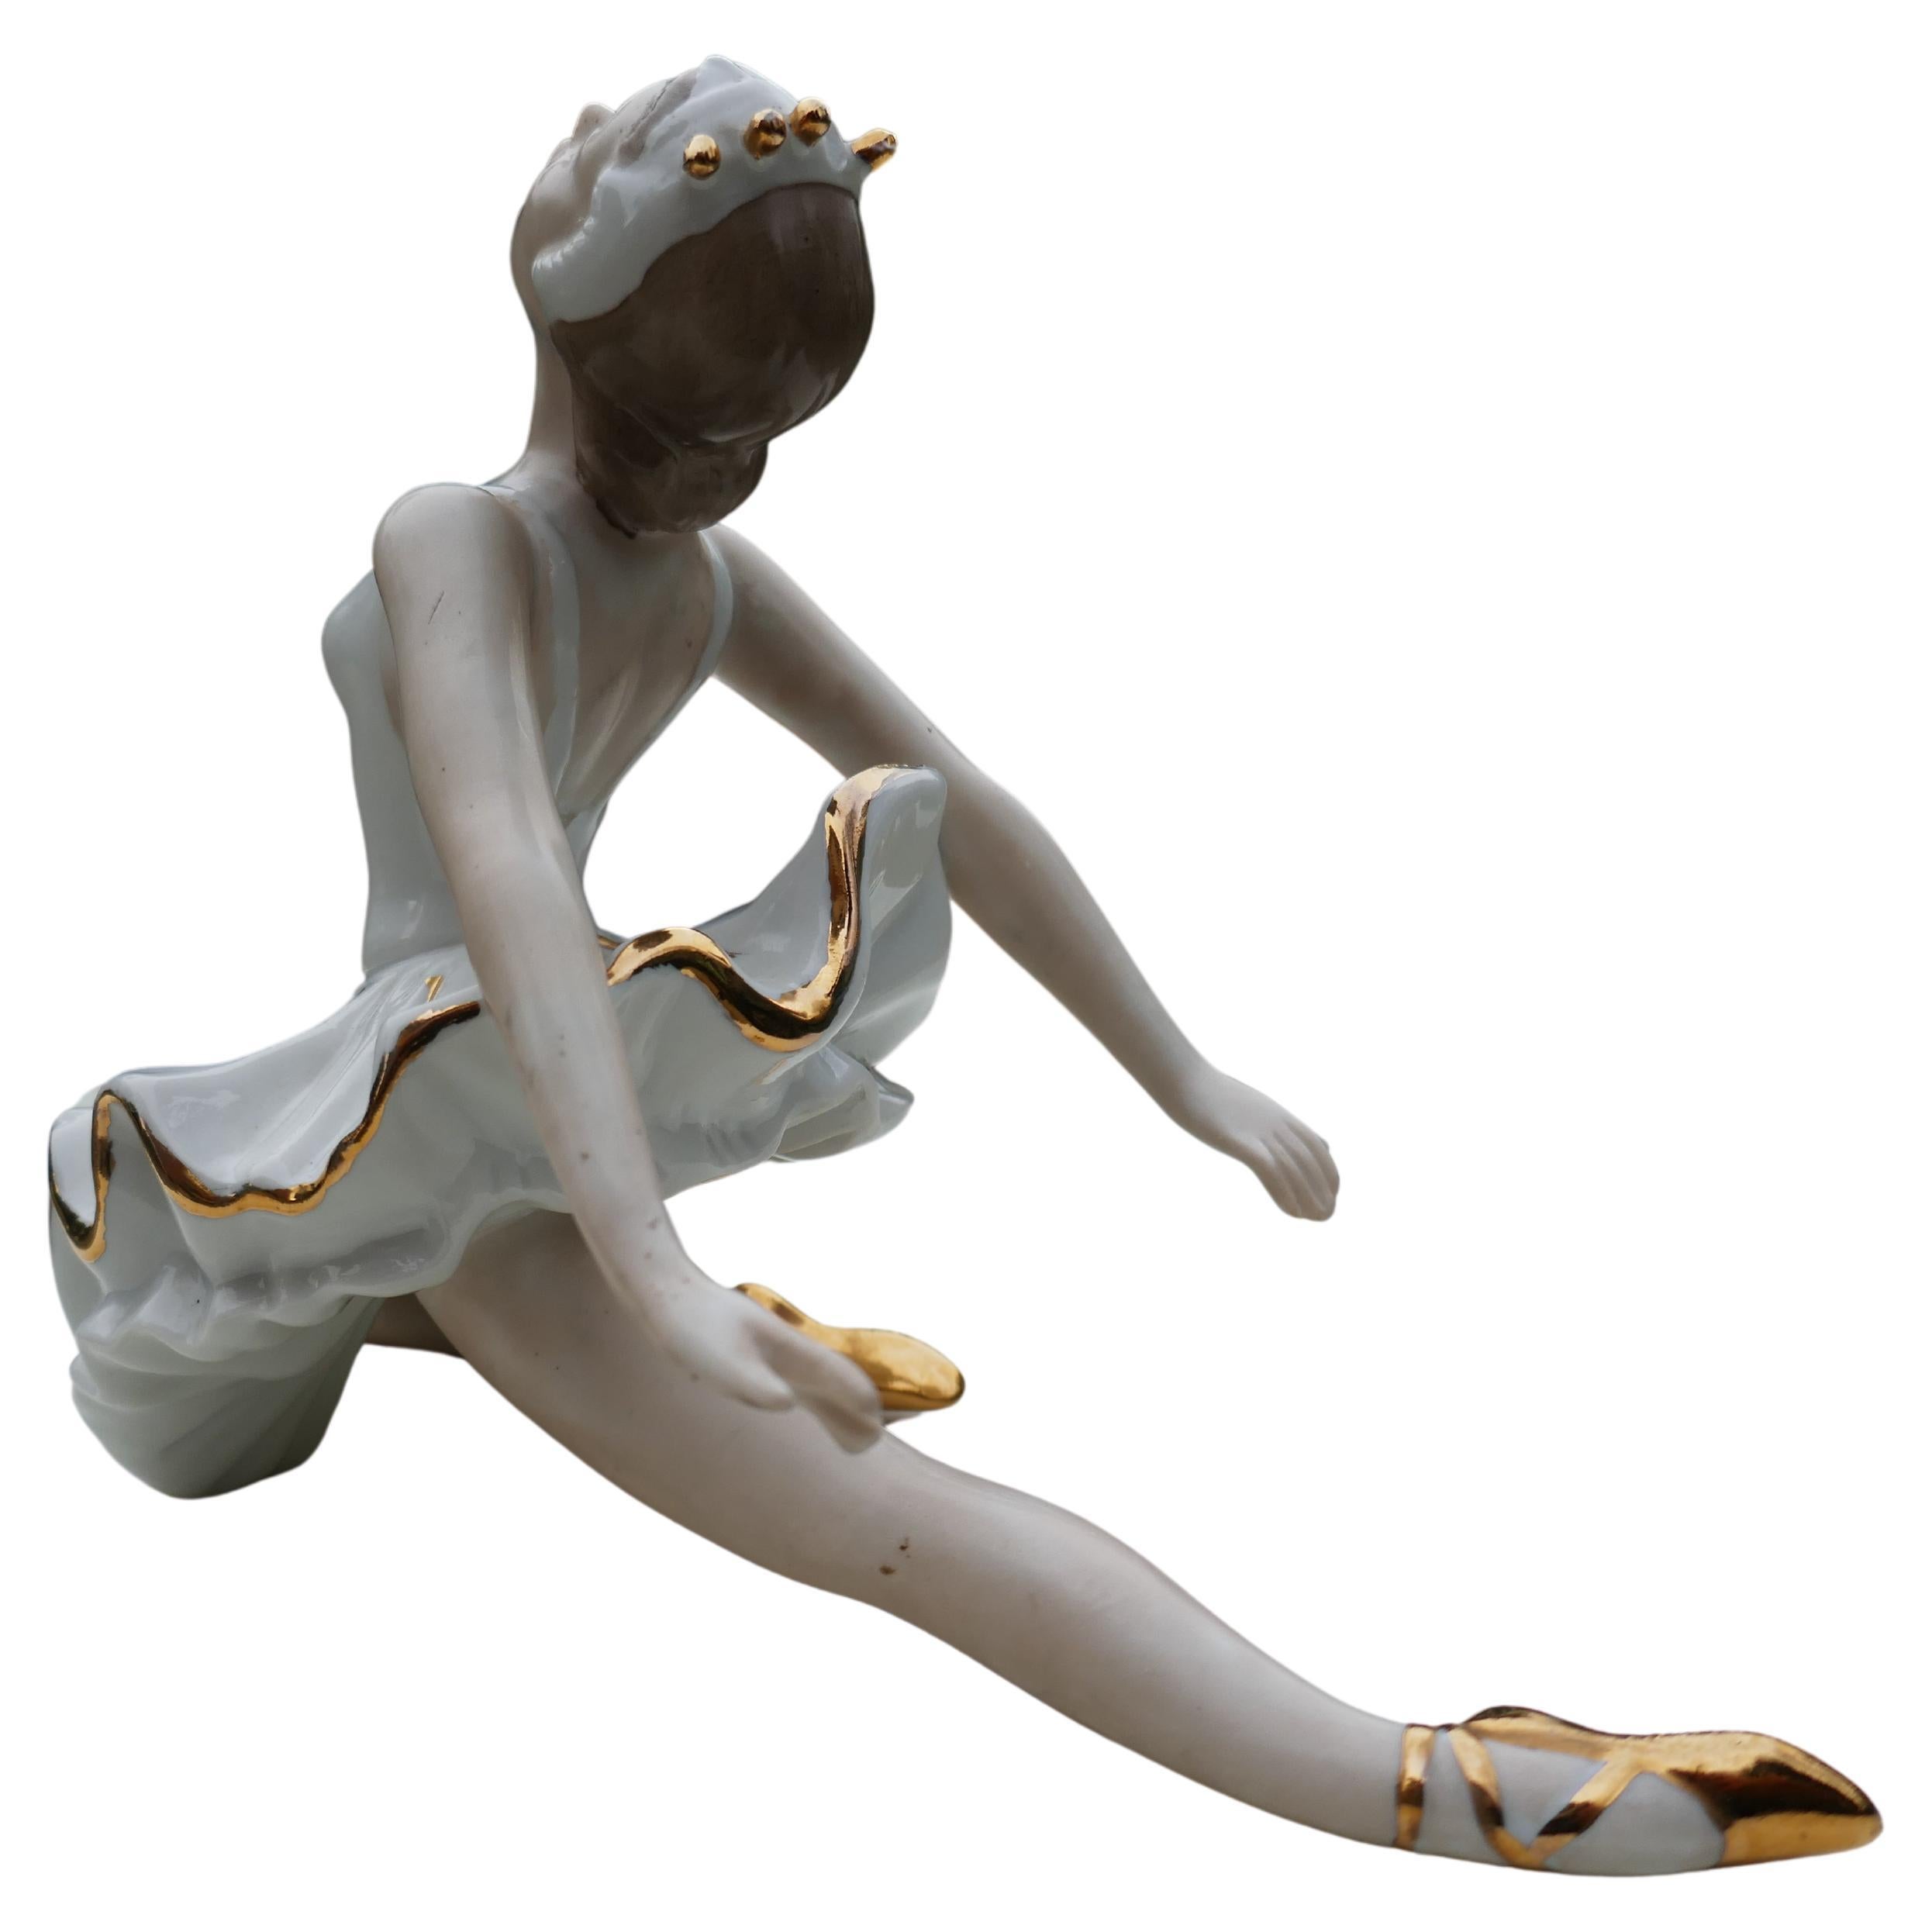 Ceramic Dancer dancing the romance Swan Lake possible Wallendorf production For Sale